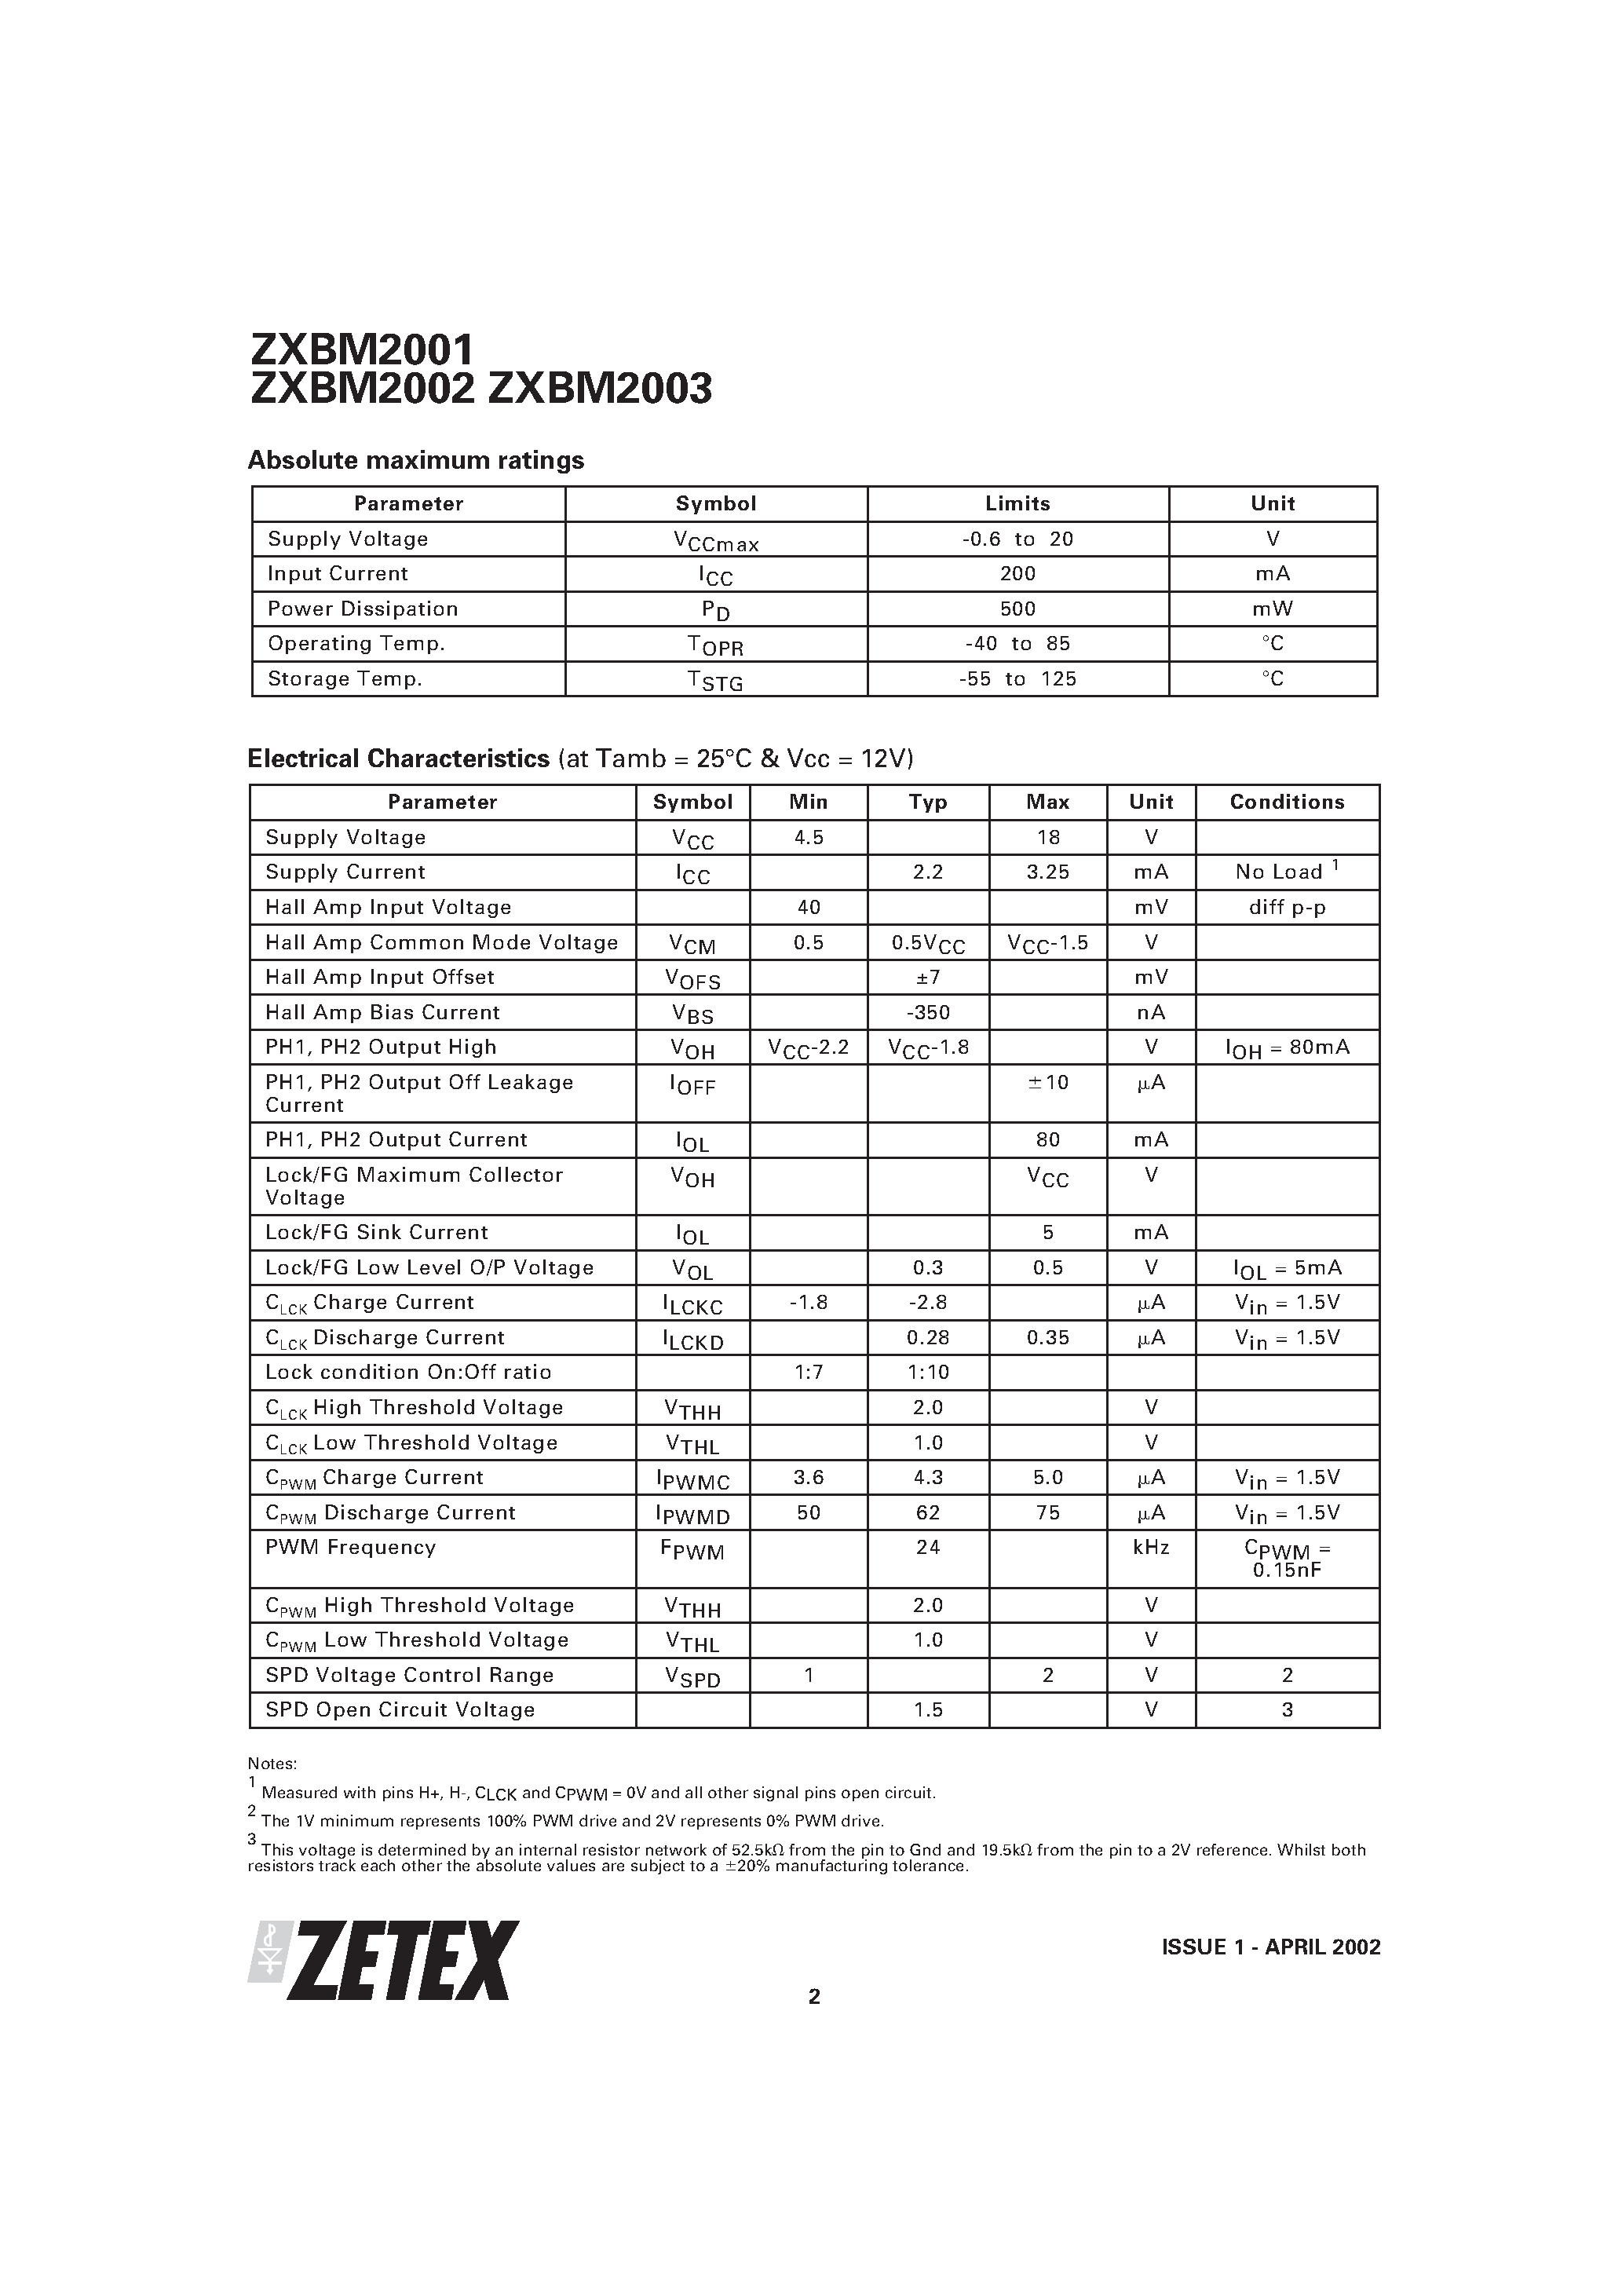 Datasheet ZXBM2001 - VARIABLE SPEED 2-PHASE FAN MOTOR CONTROLLER page 2